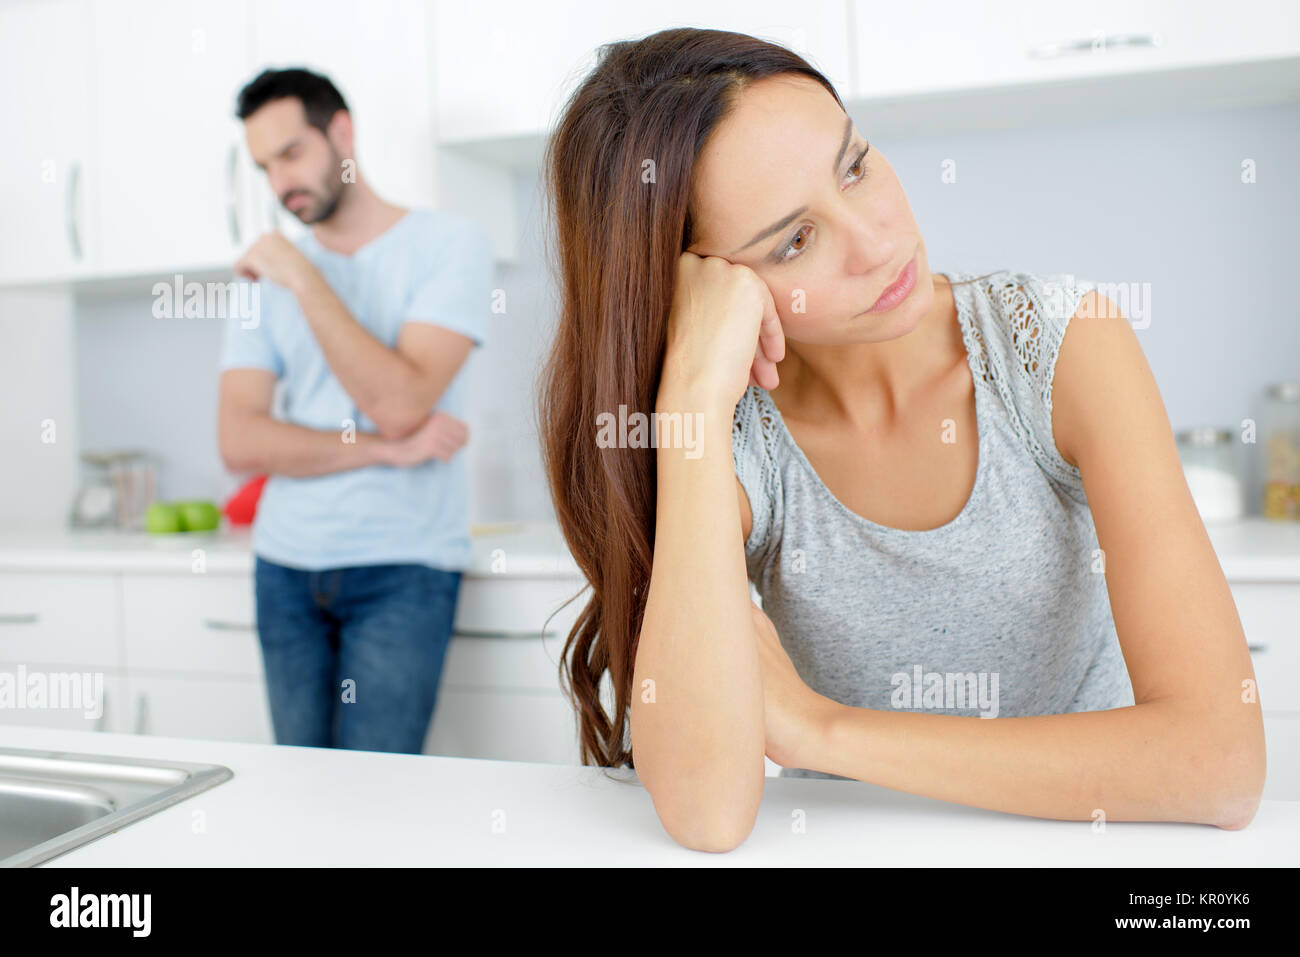 Couple having an argument in the kitchen Stock Photo